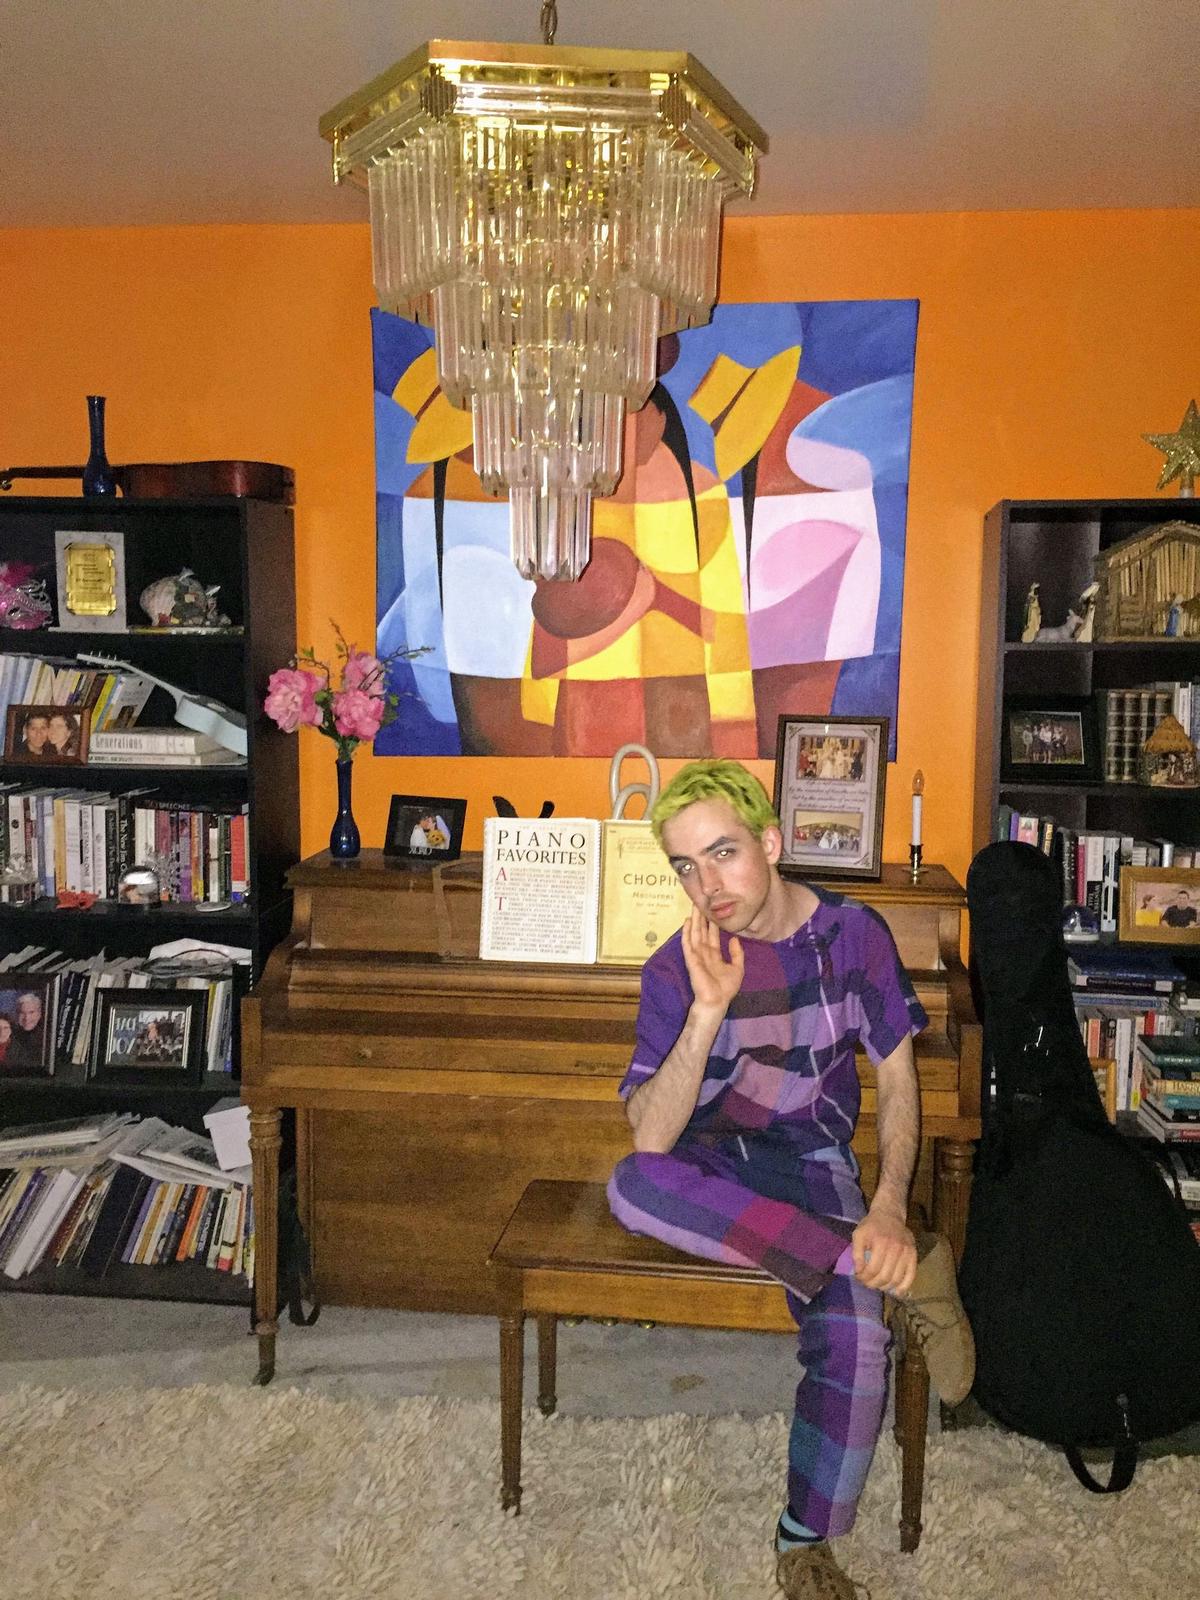 rosemary seated on a piano bench in someone else's living room, with short green hair, wearing this full-body purple outfit